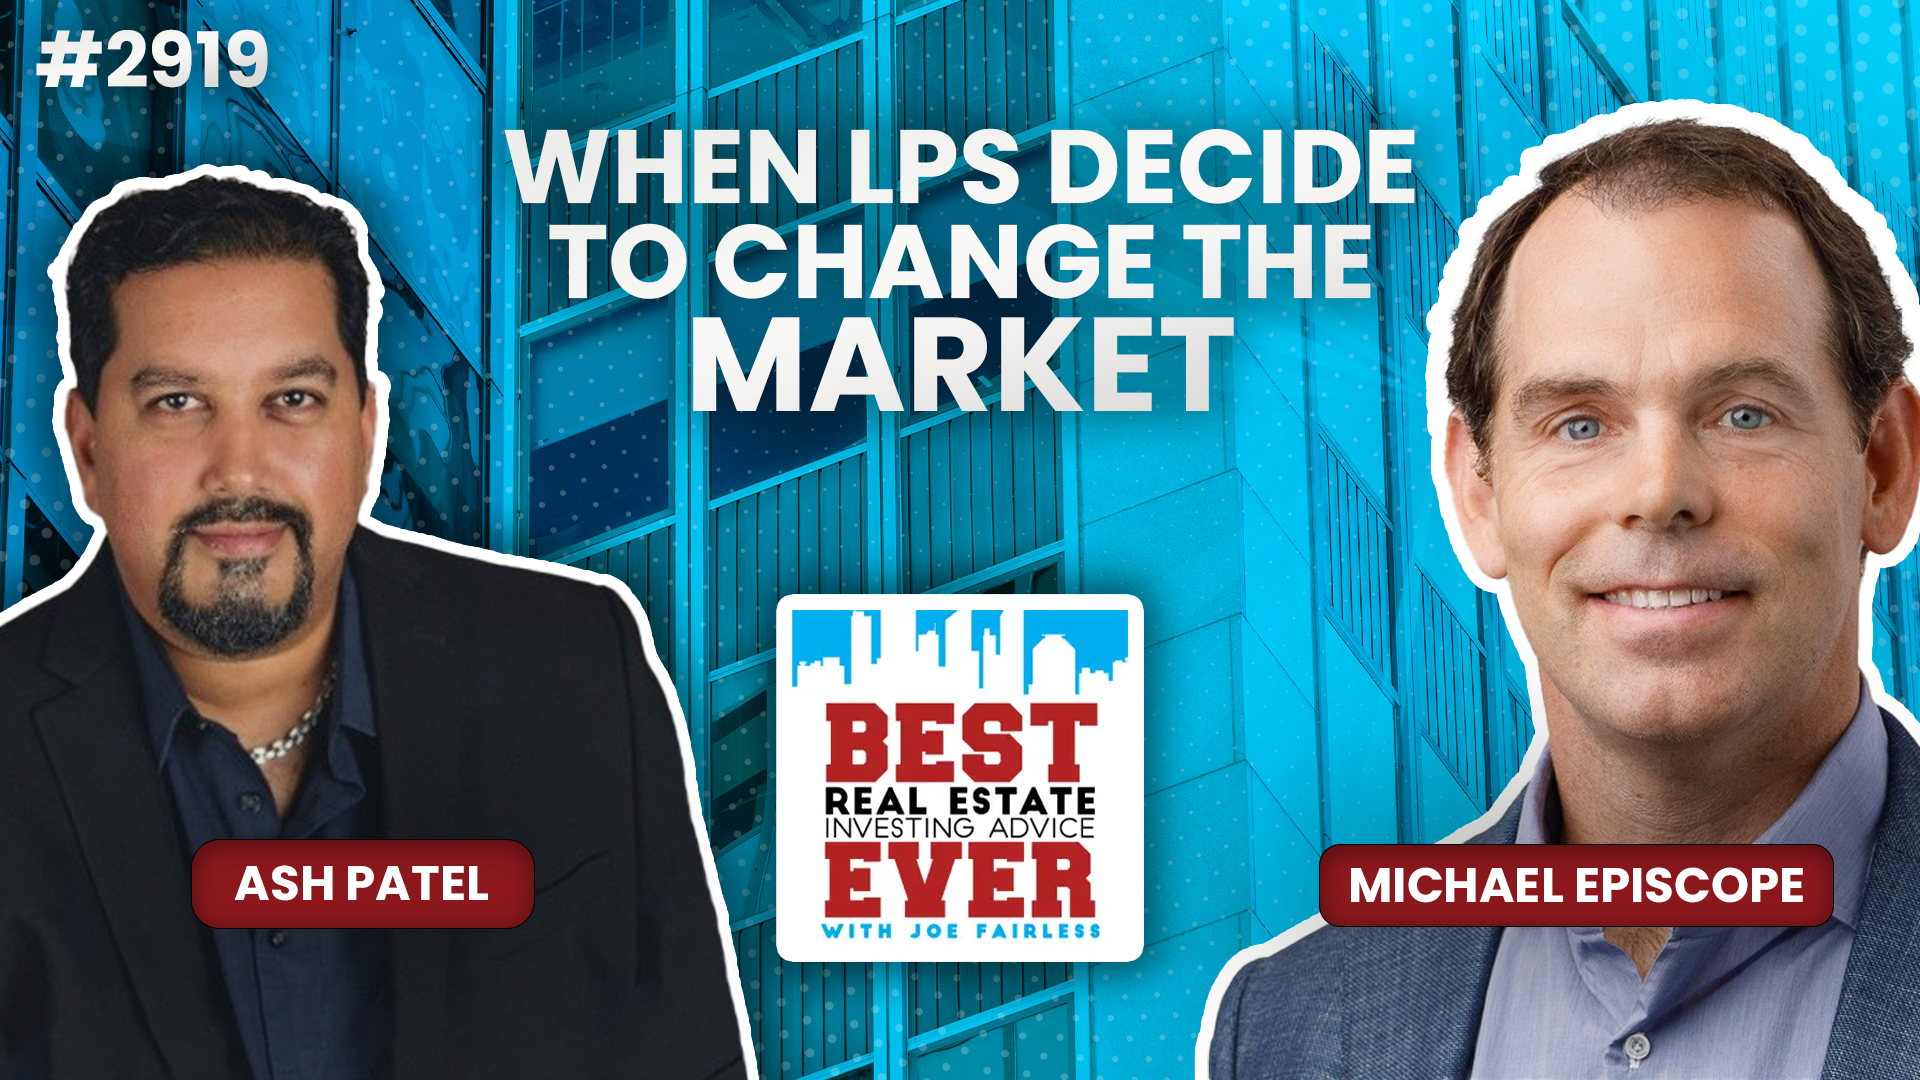 JF2919: When LPs Decide to Change the Market ft. Michael Episcope